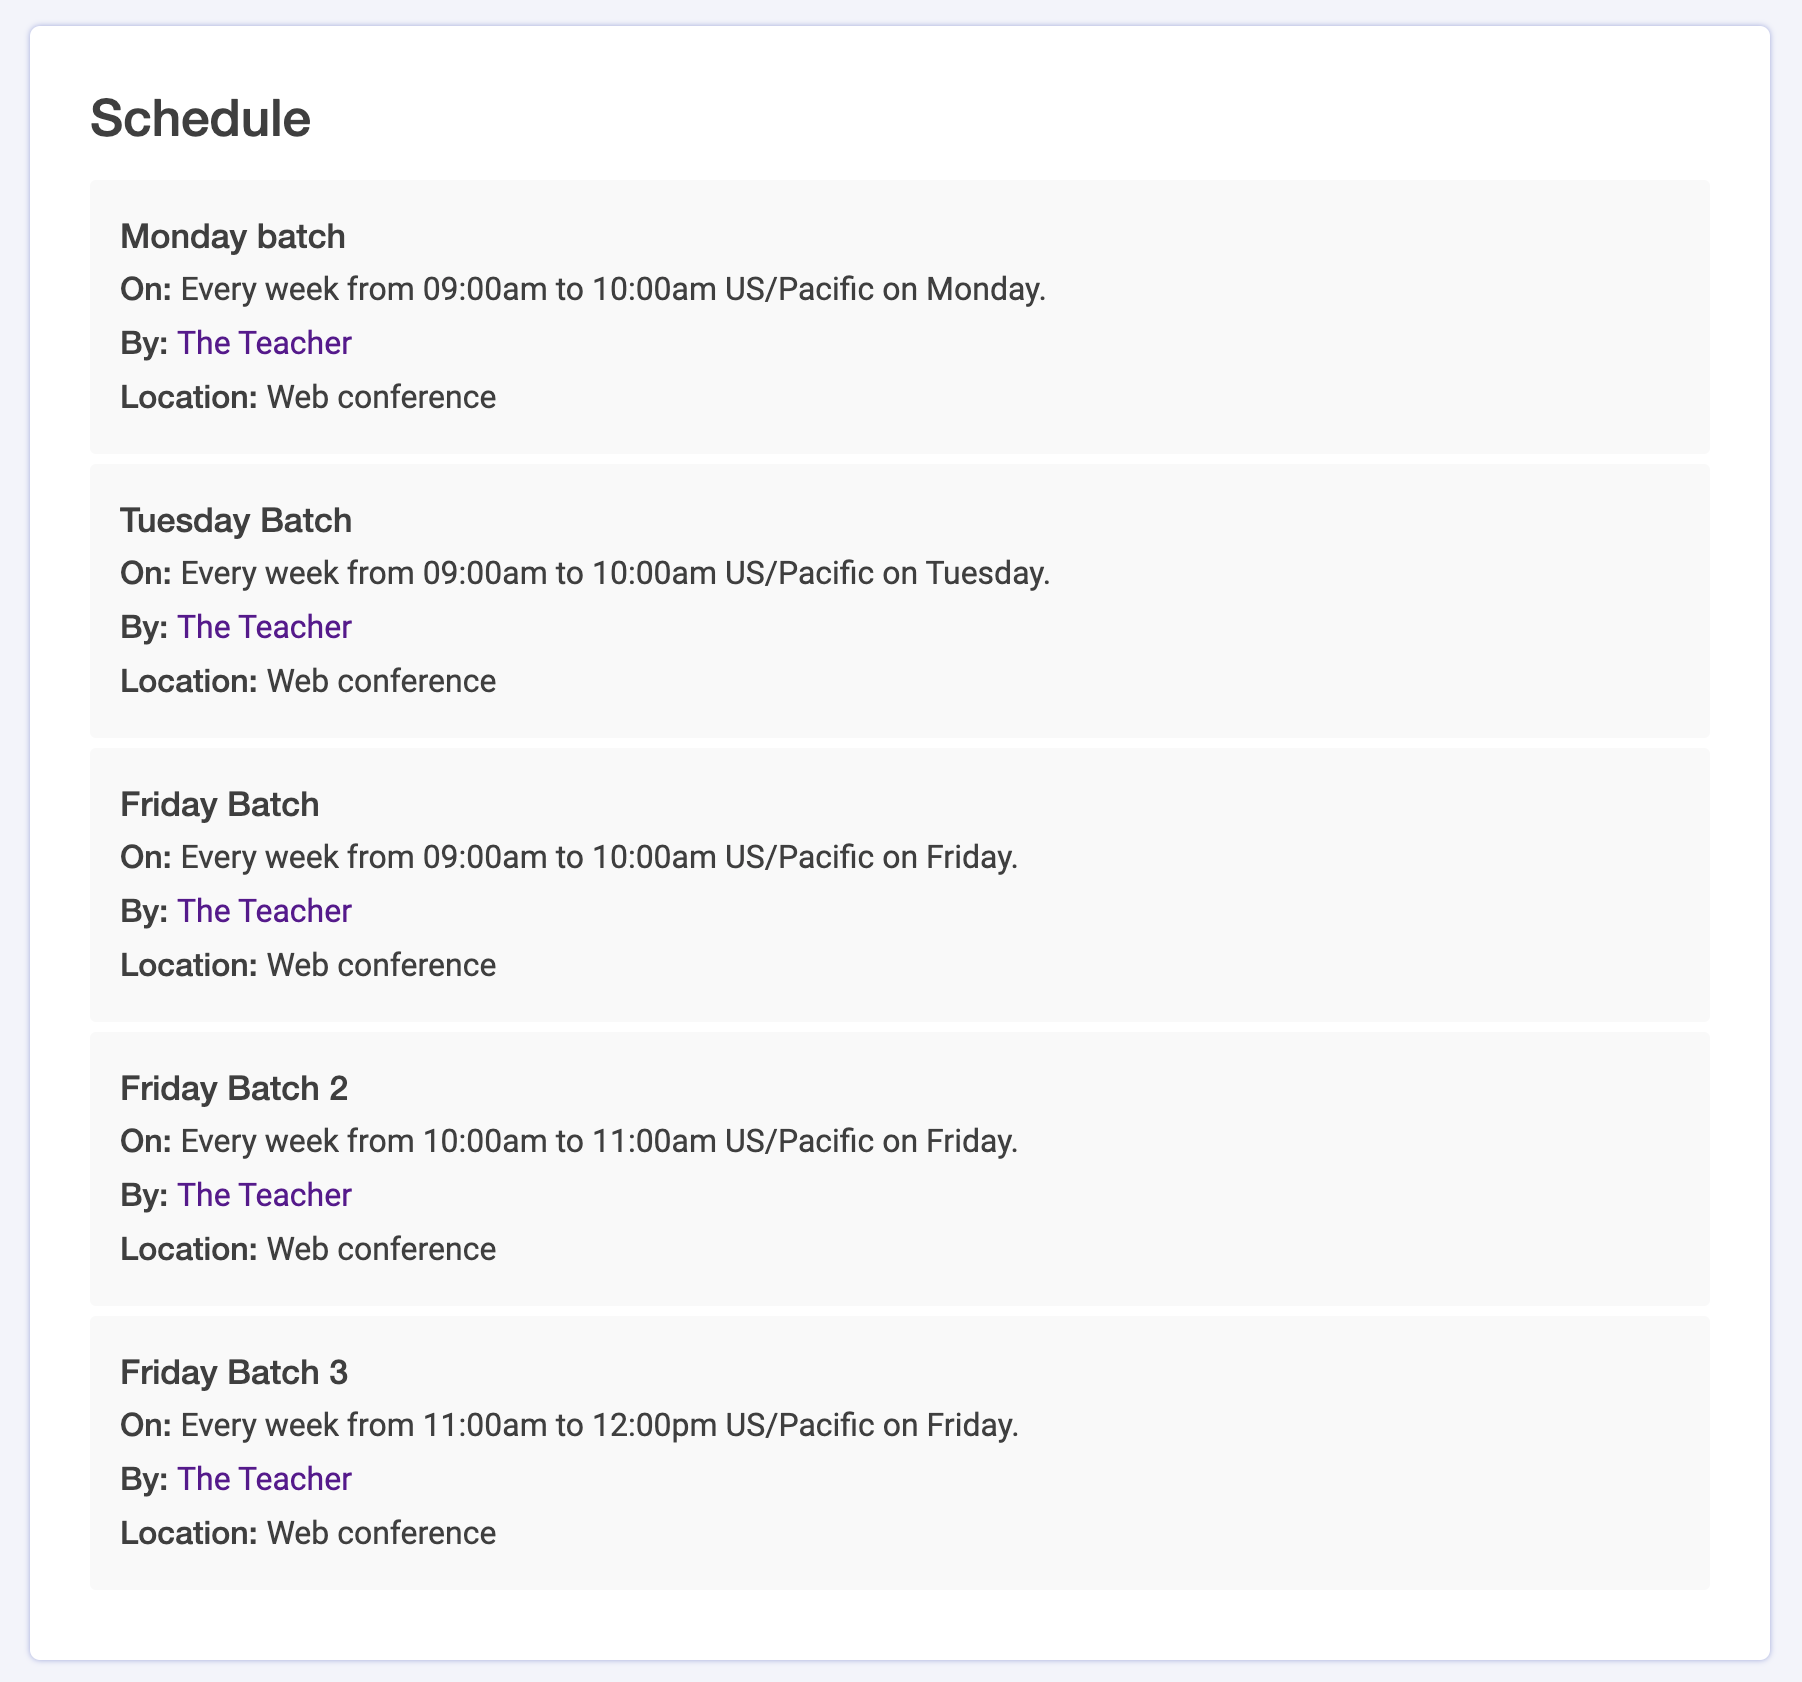 events_schedule_sales_page.png